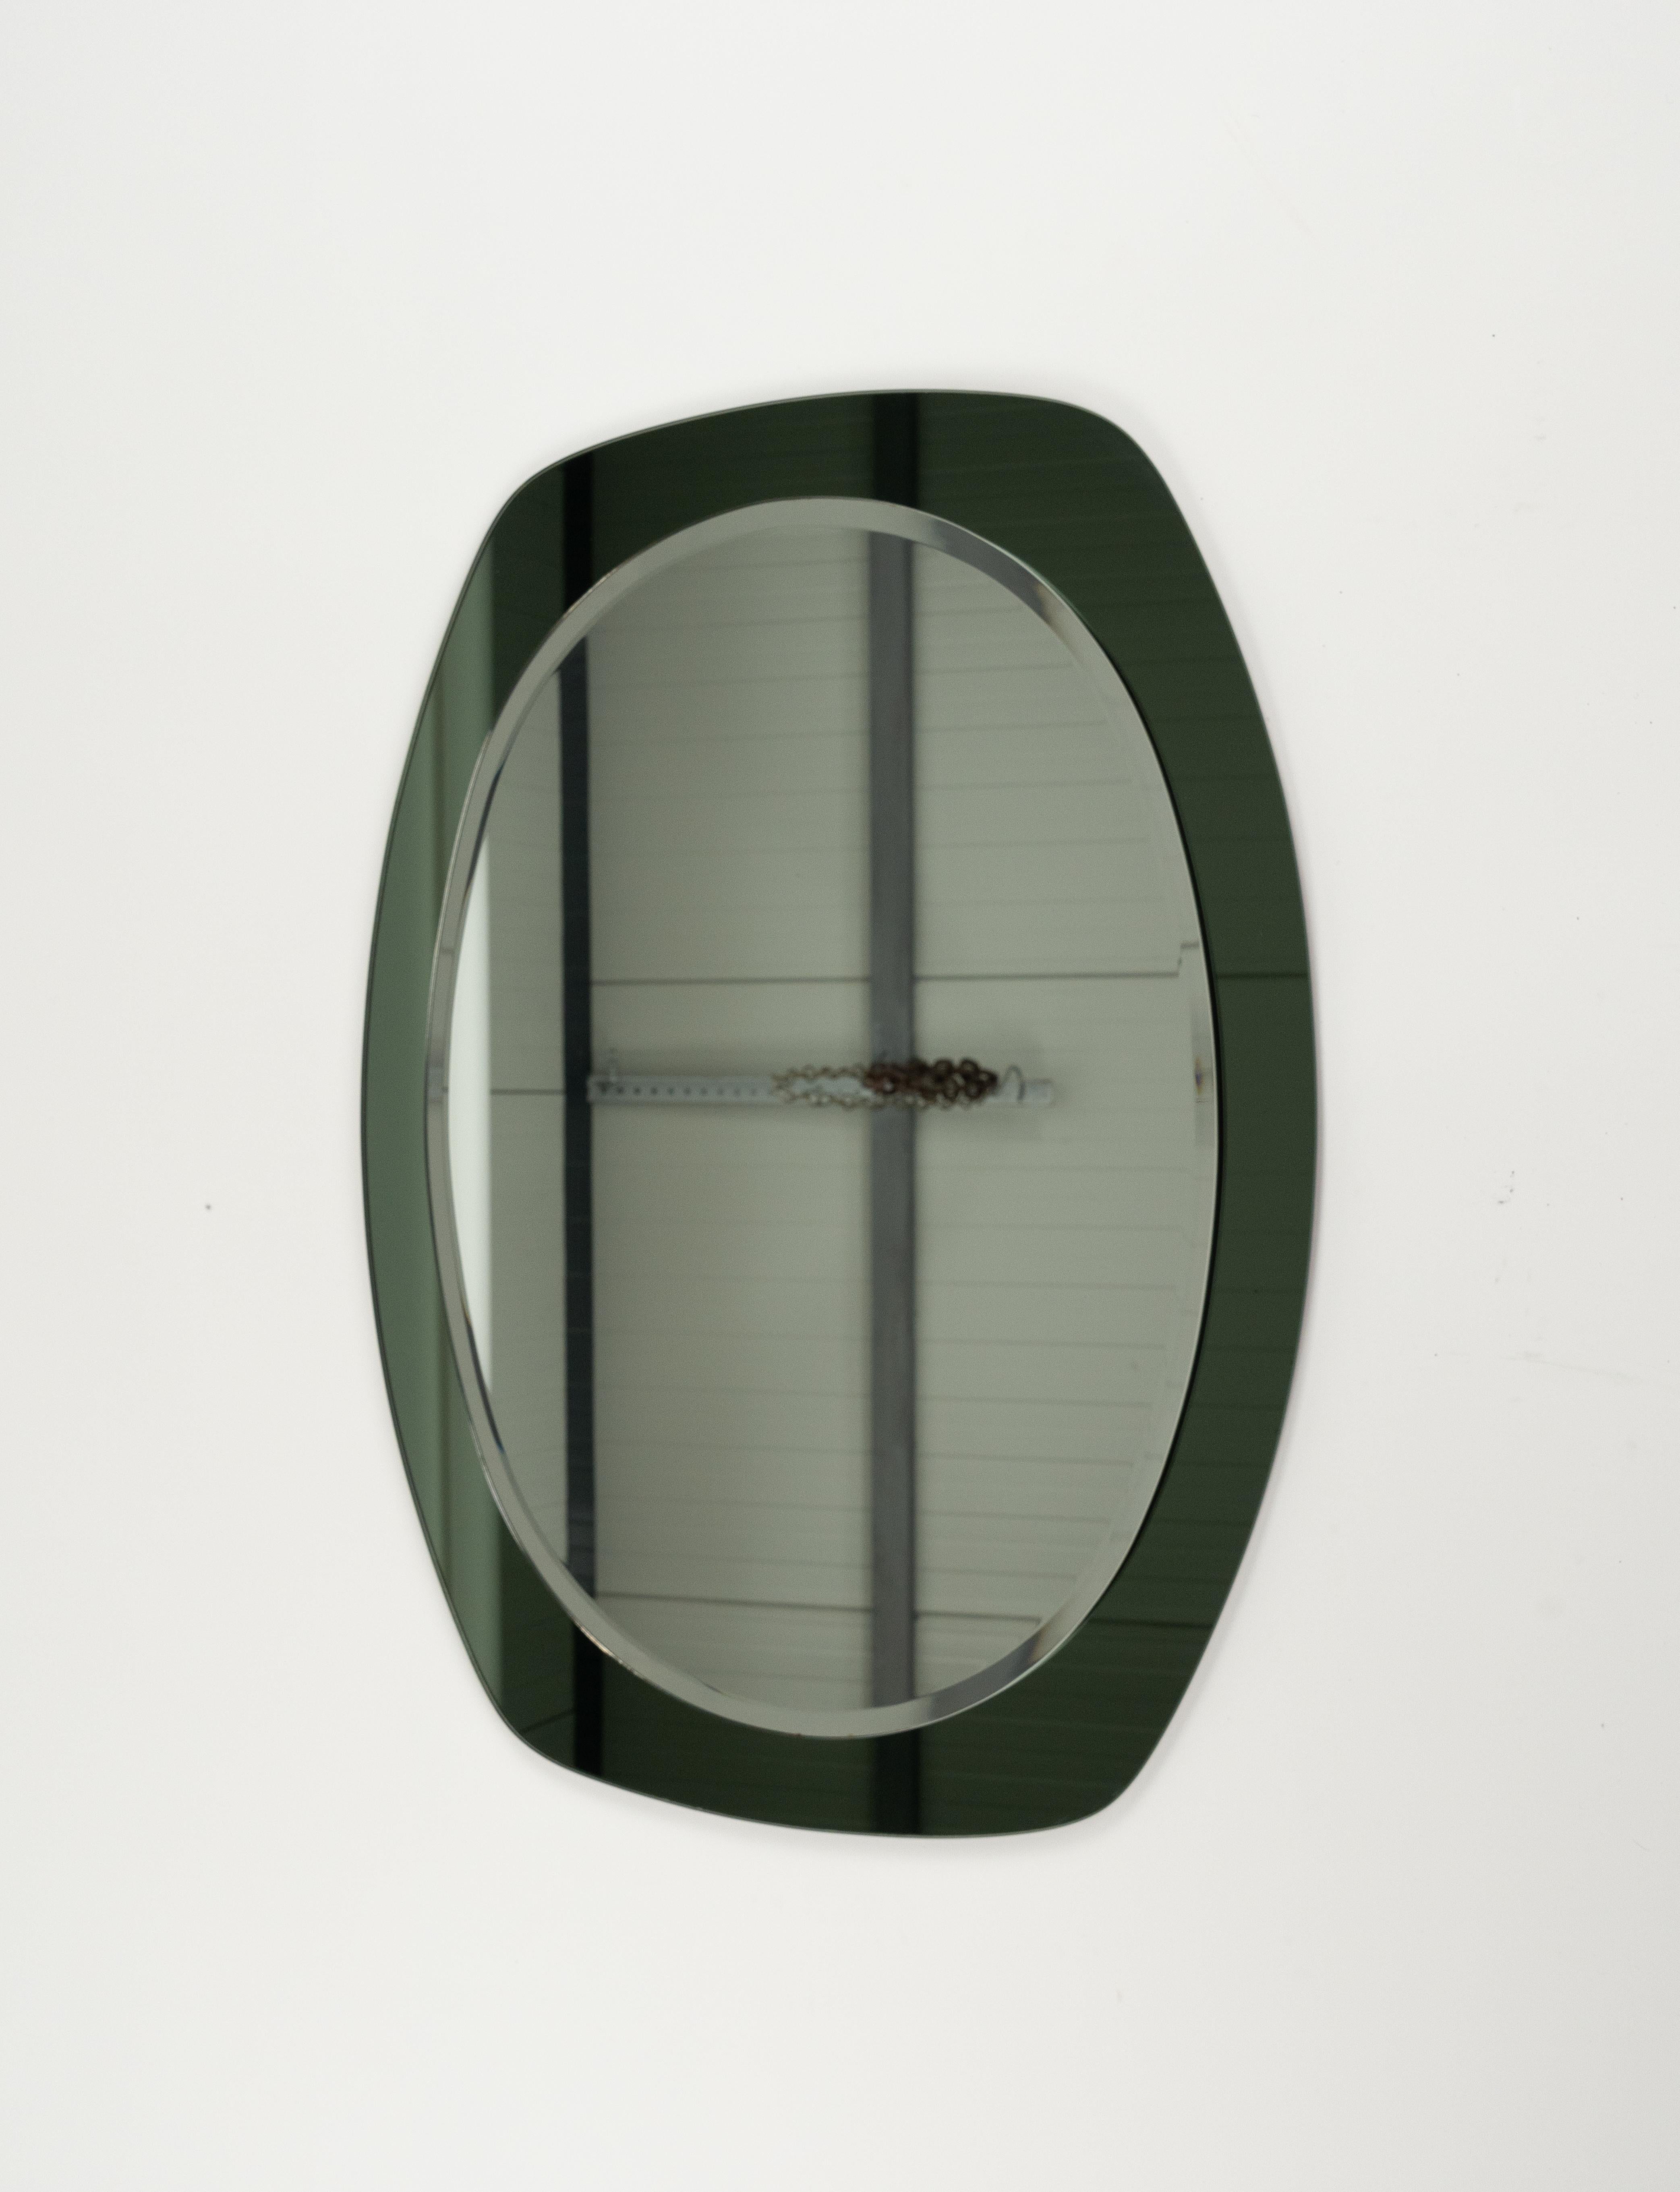 Mid-20th Century Midcentury Cristal Art Oval Wall Mirror with Green Frame, Italy 1960s For Sale